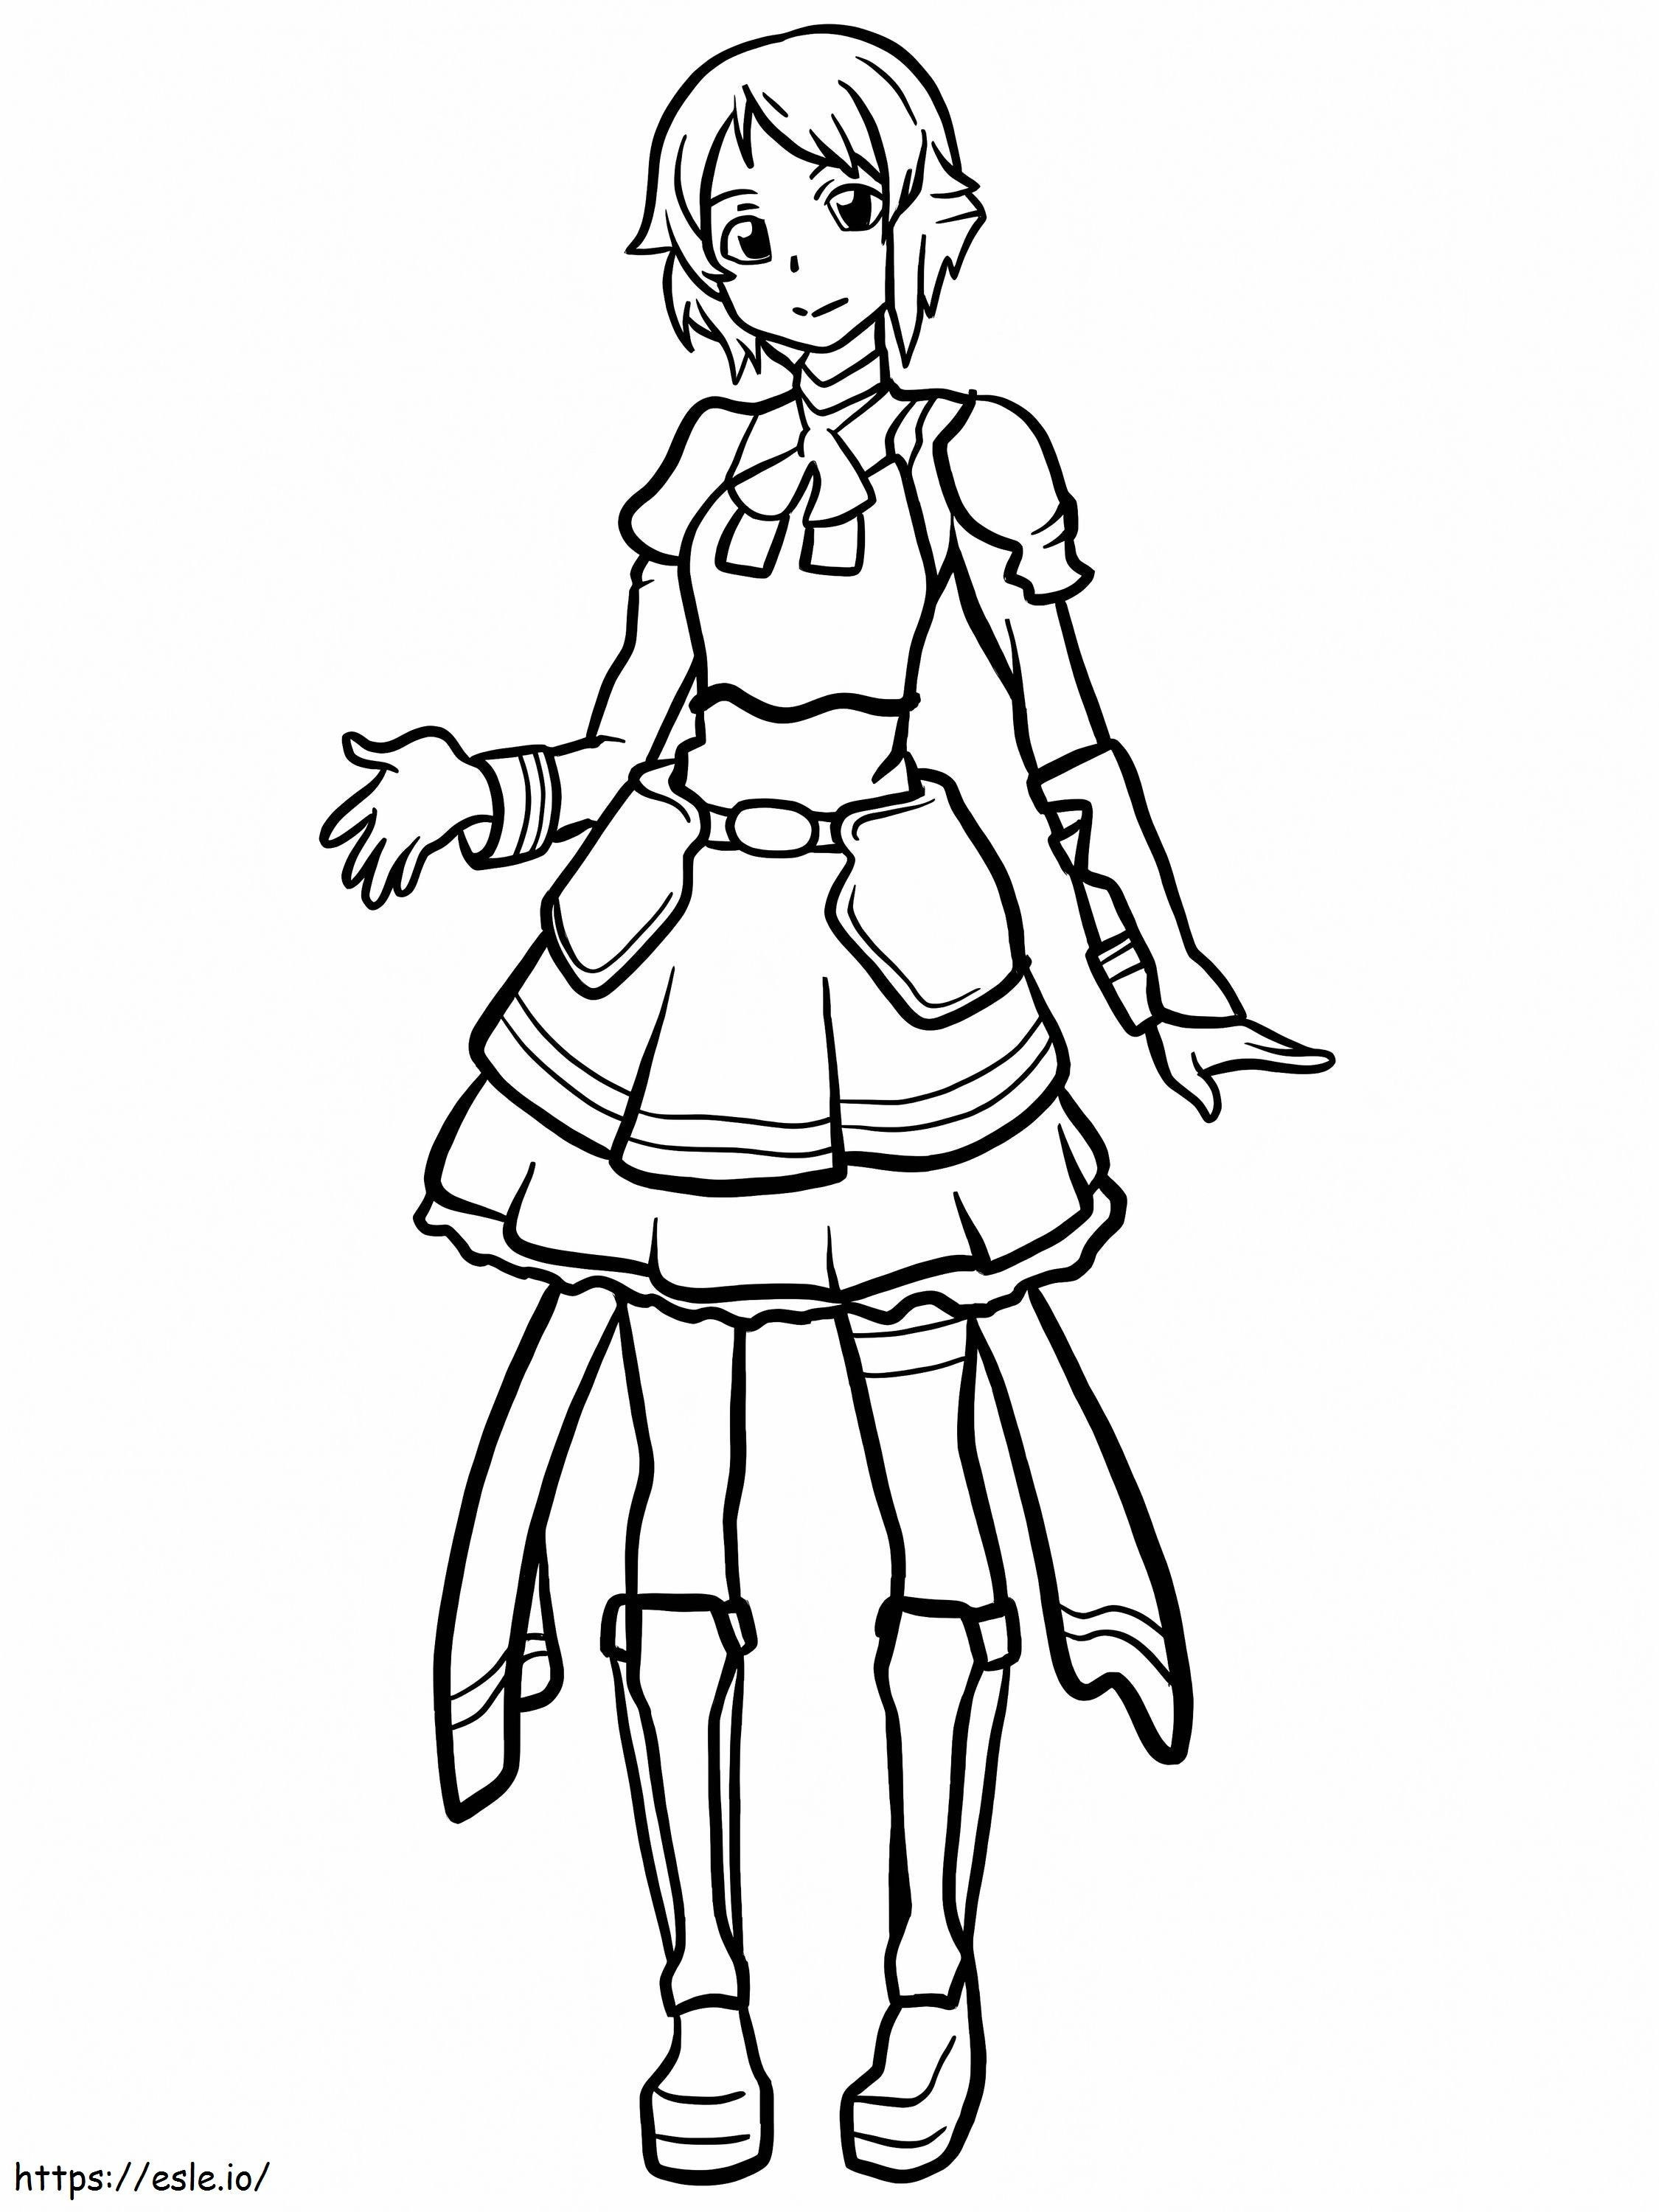 Lisbeth coloring page